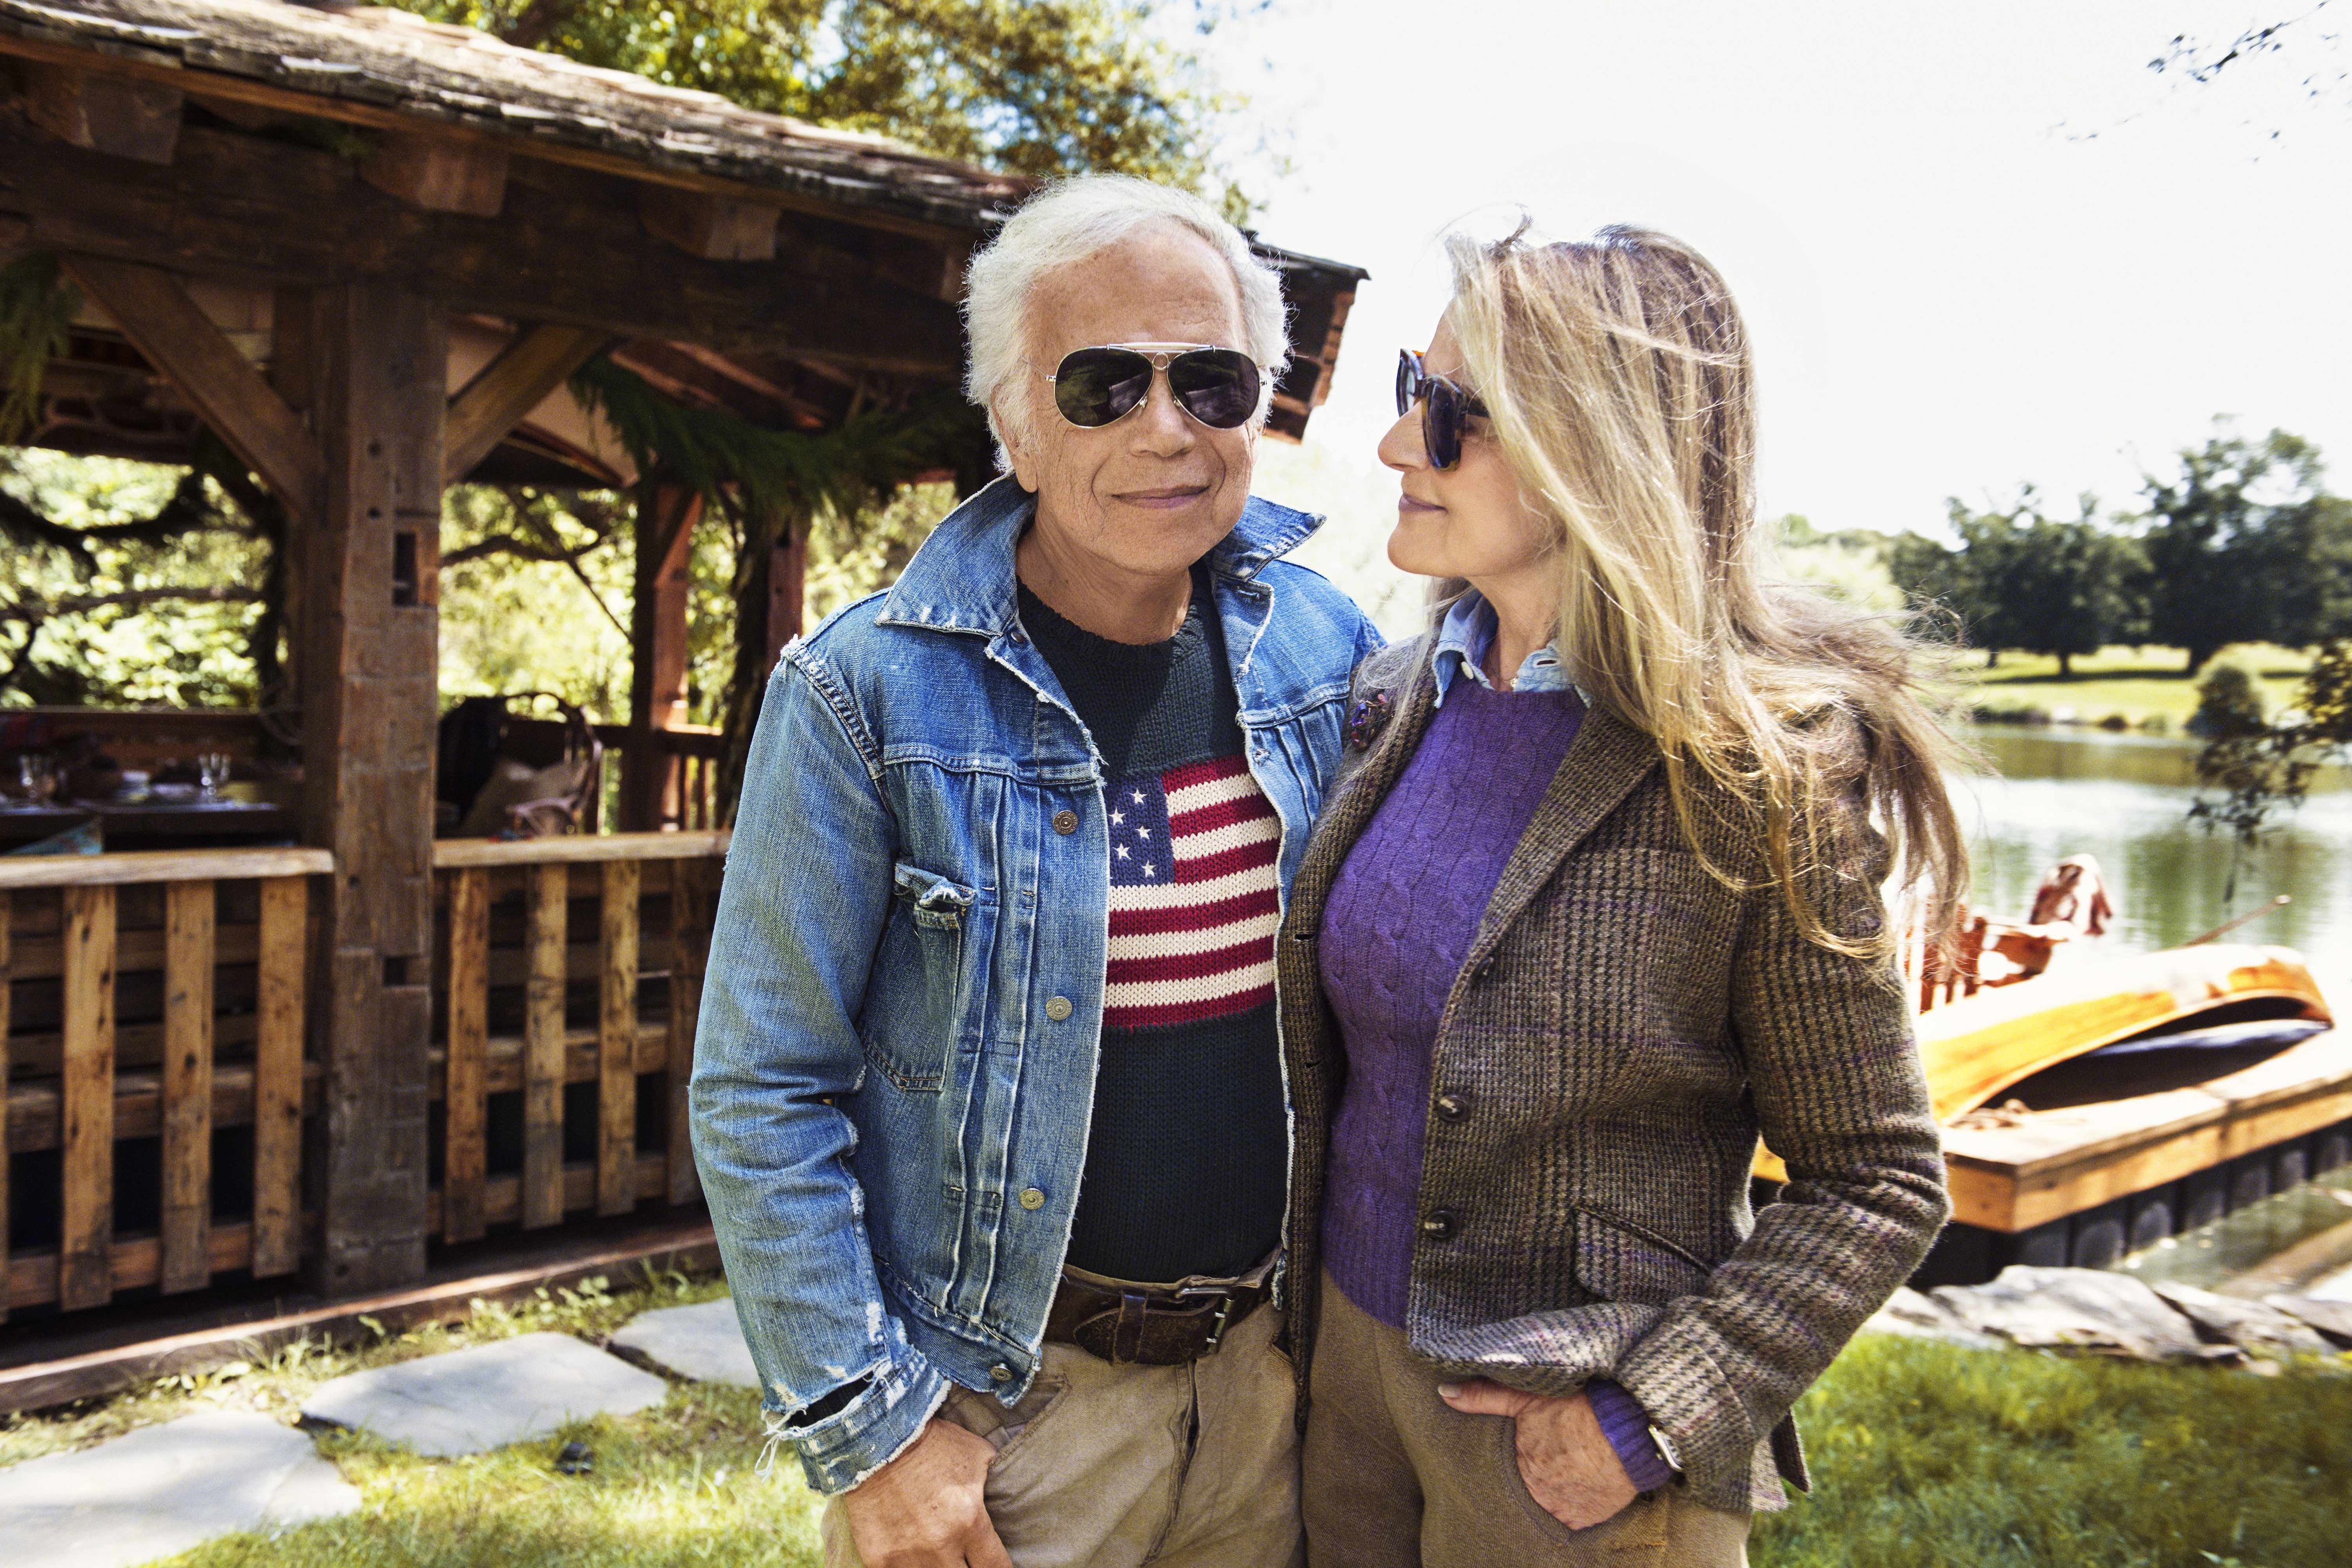 Ralph Lauren and wife Ricky celebrate their 50th anniversary